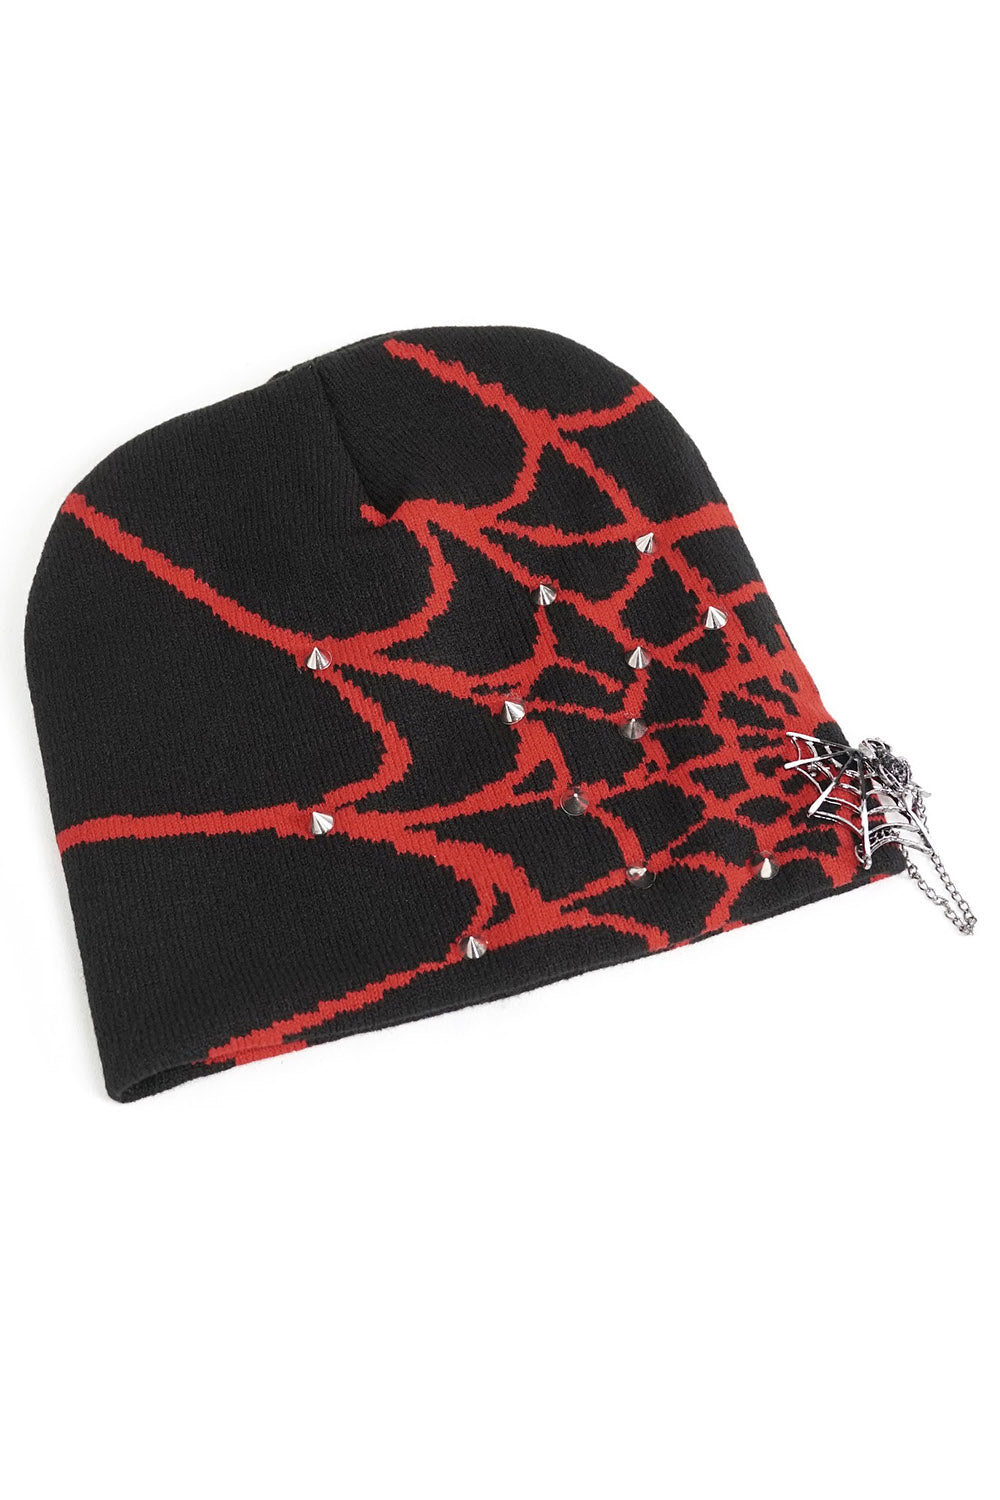 knitted red and black spiderweb beanie